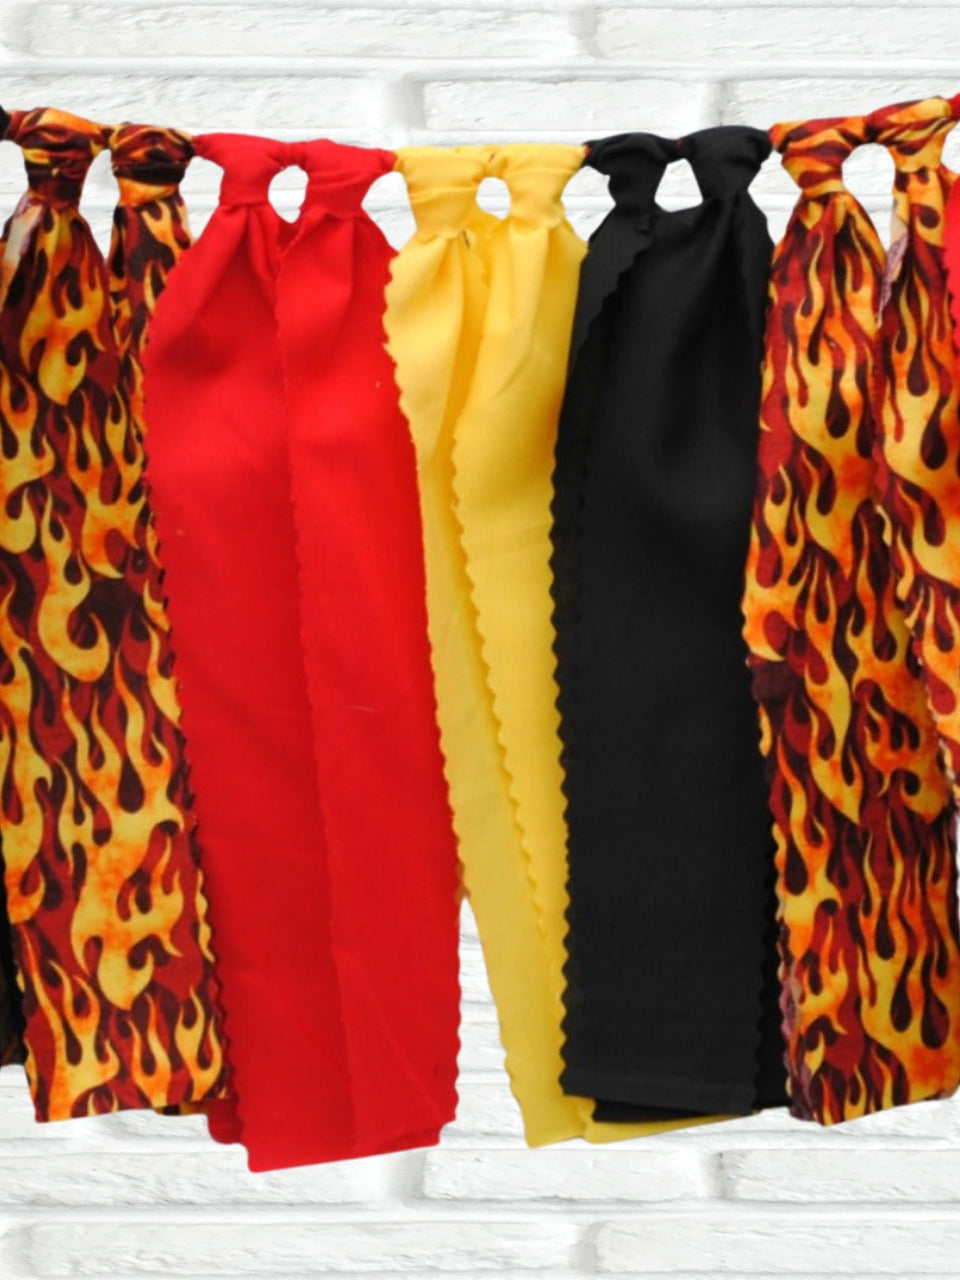 Firefighter Fabric Bunting - FREE Shipping